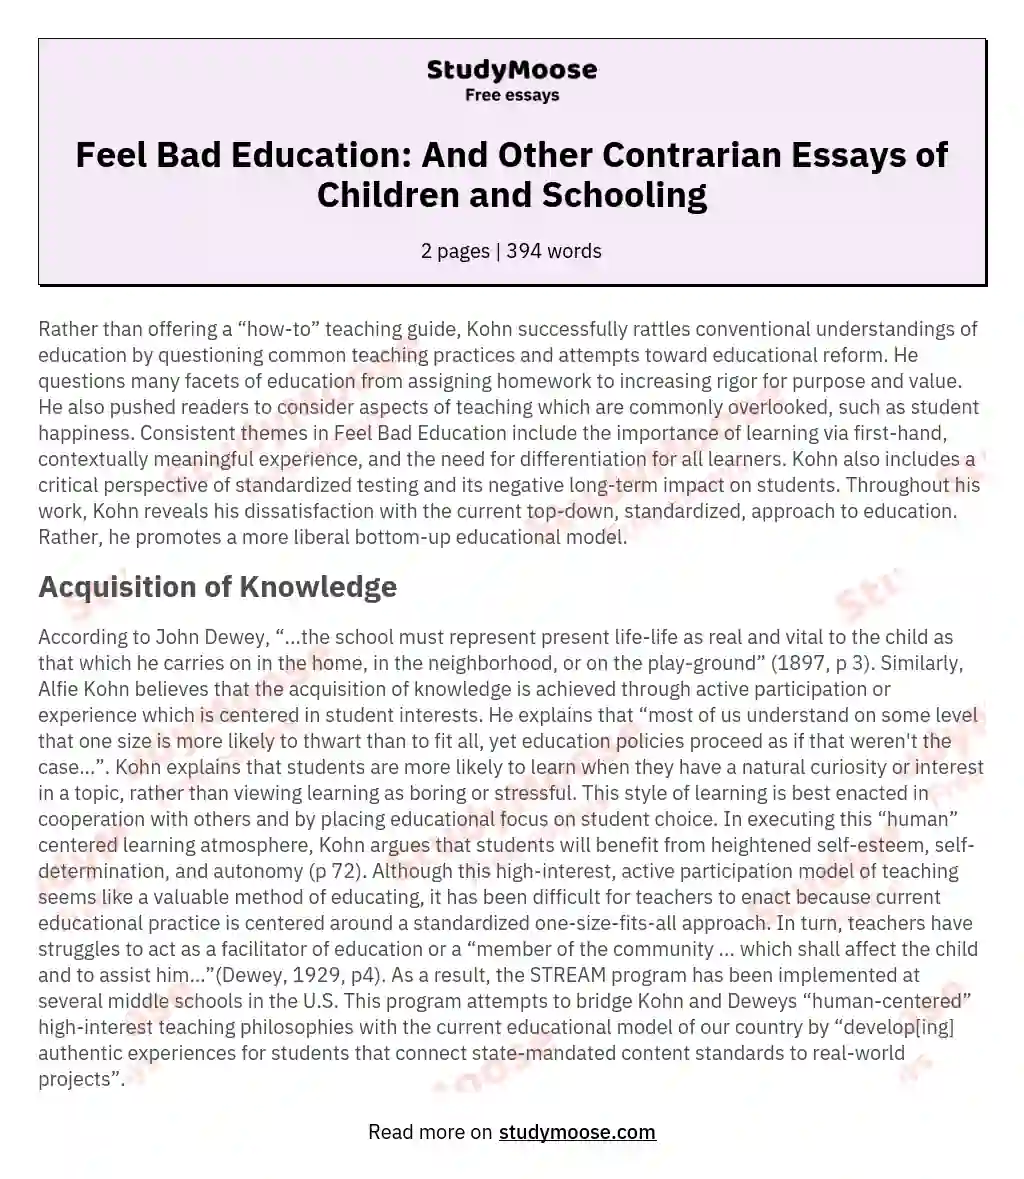 Feel Bad Education: And Other Contrarian Essays of Children and Schooling essay